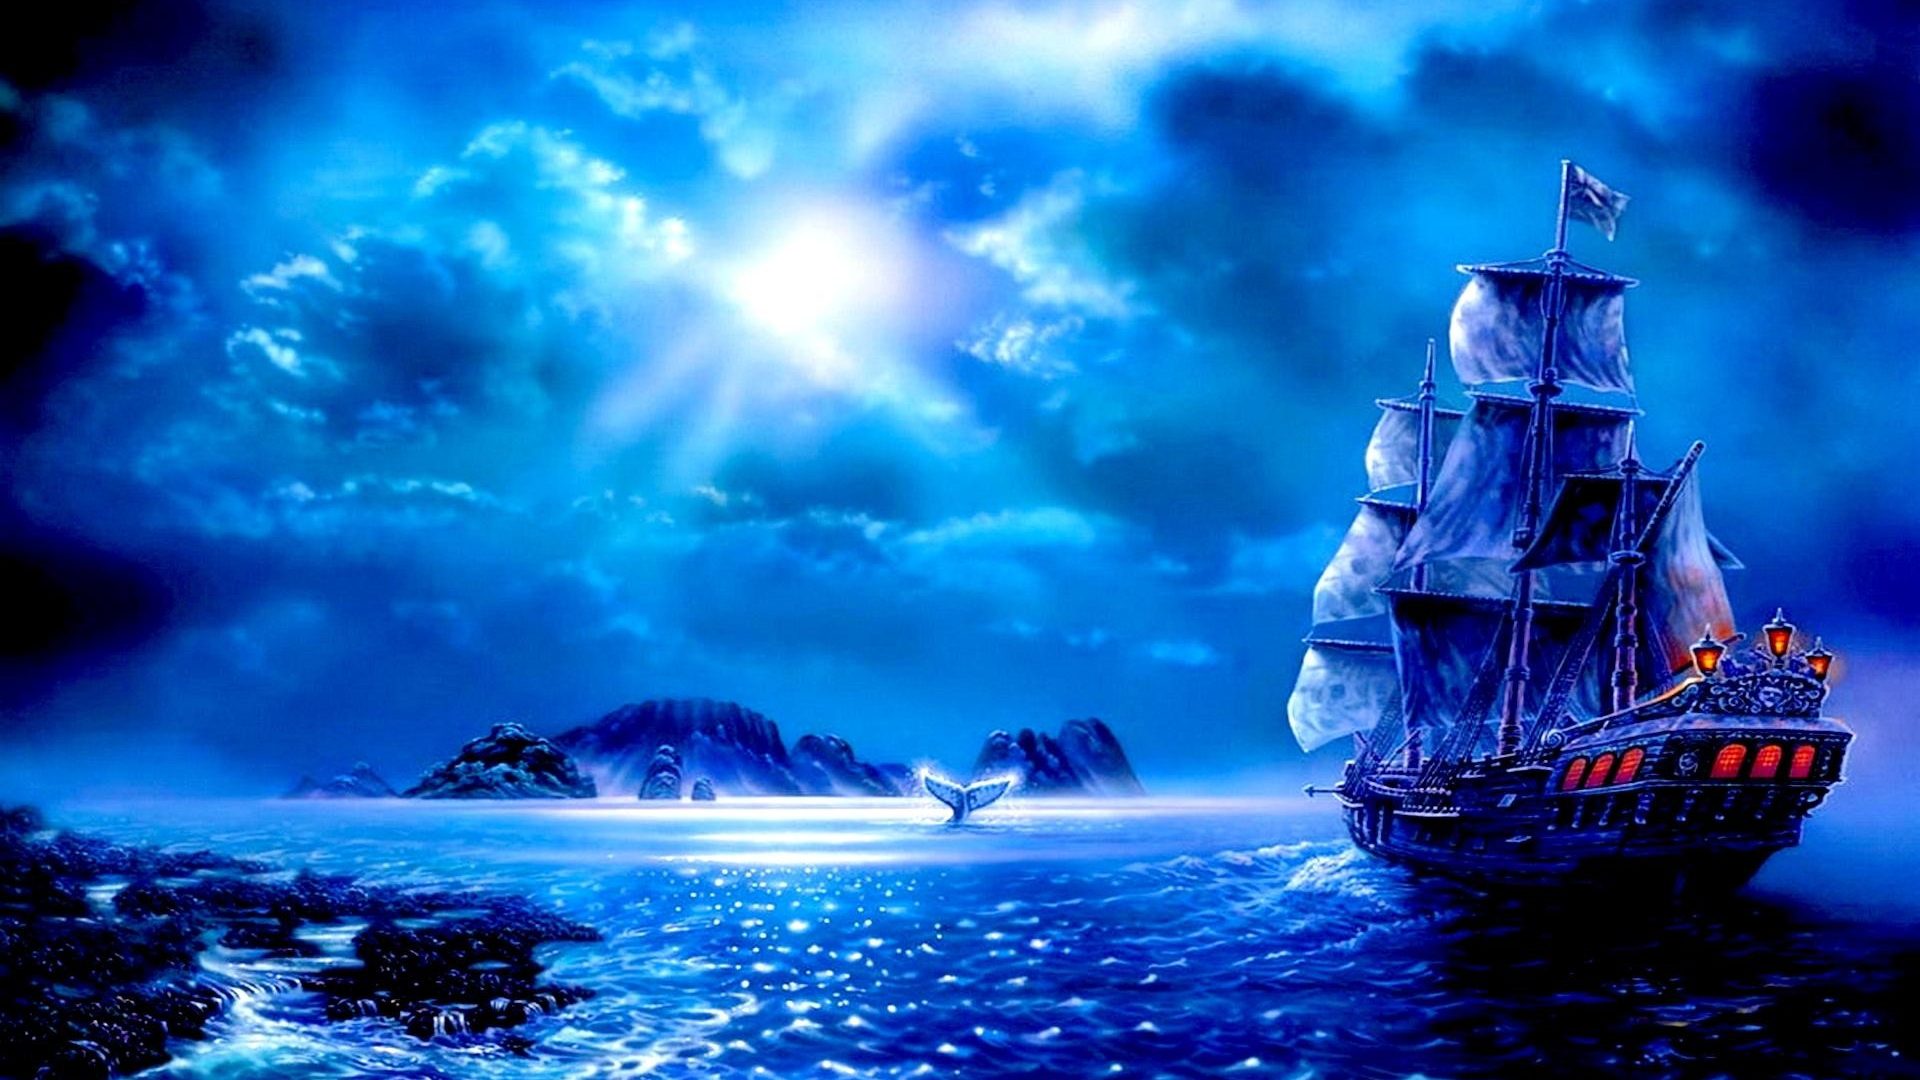 Pirate ship latest hd wallpapers